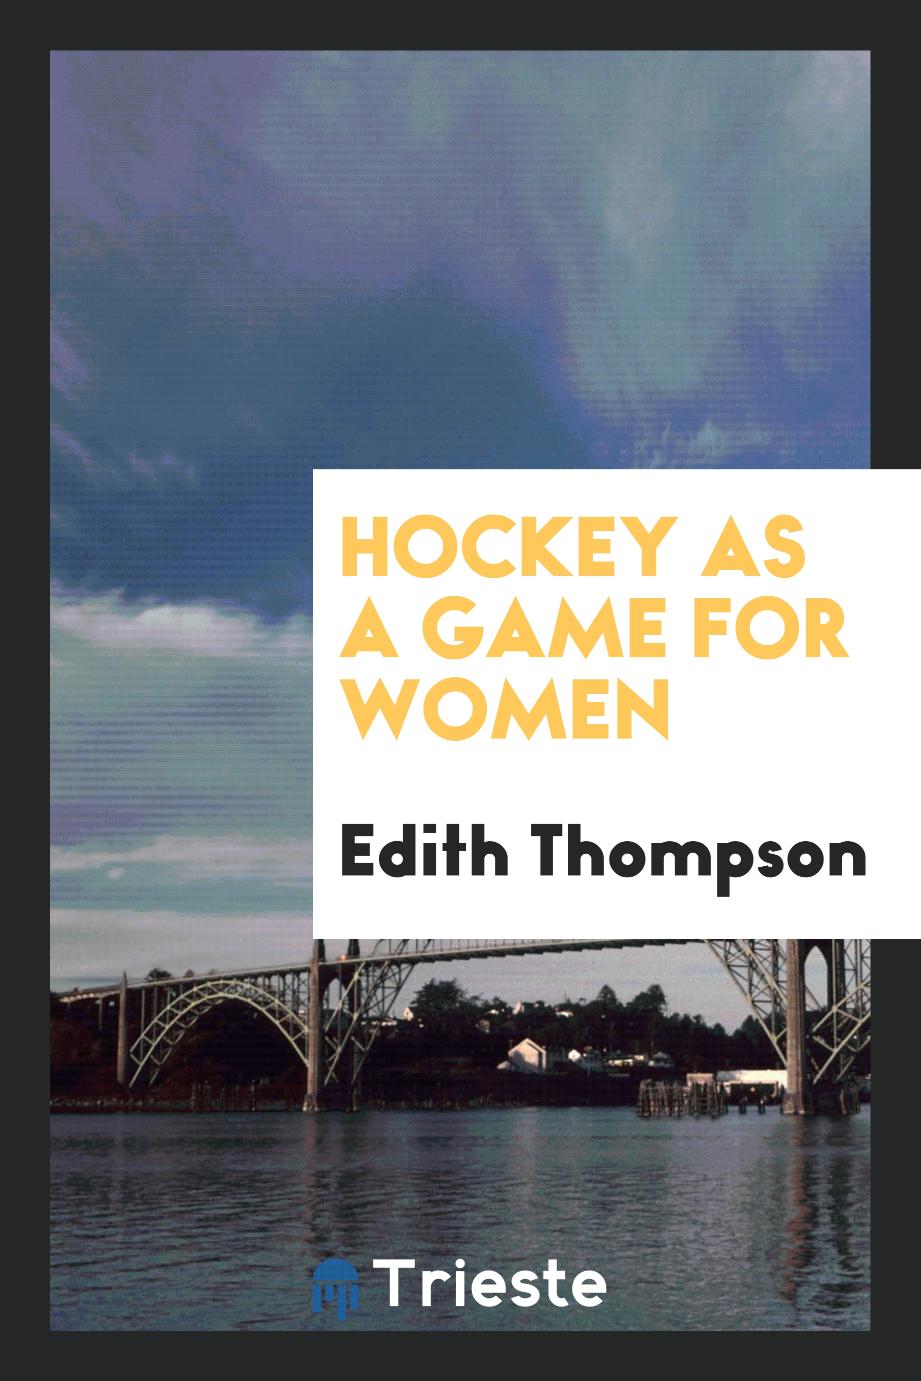 Hockey as a Game for Women